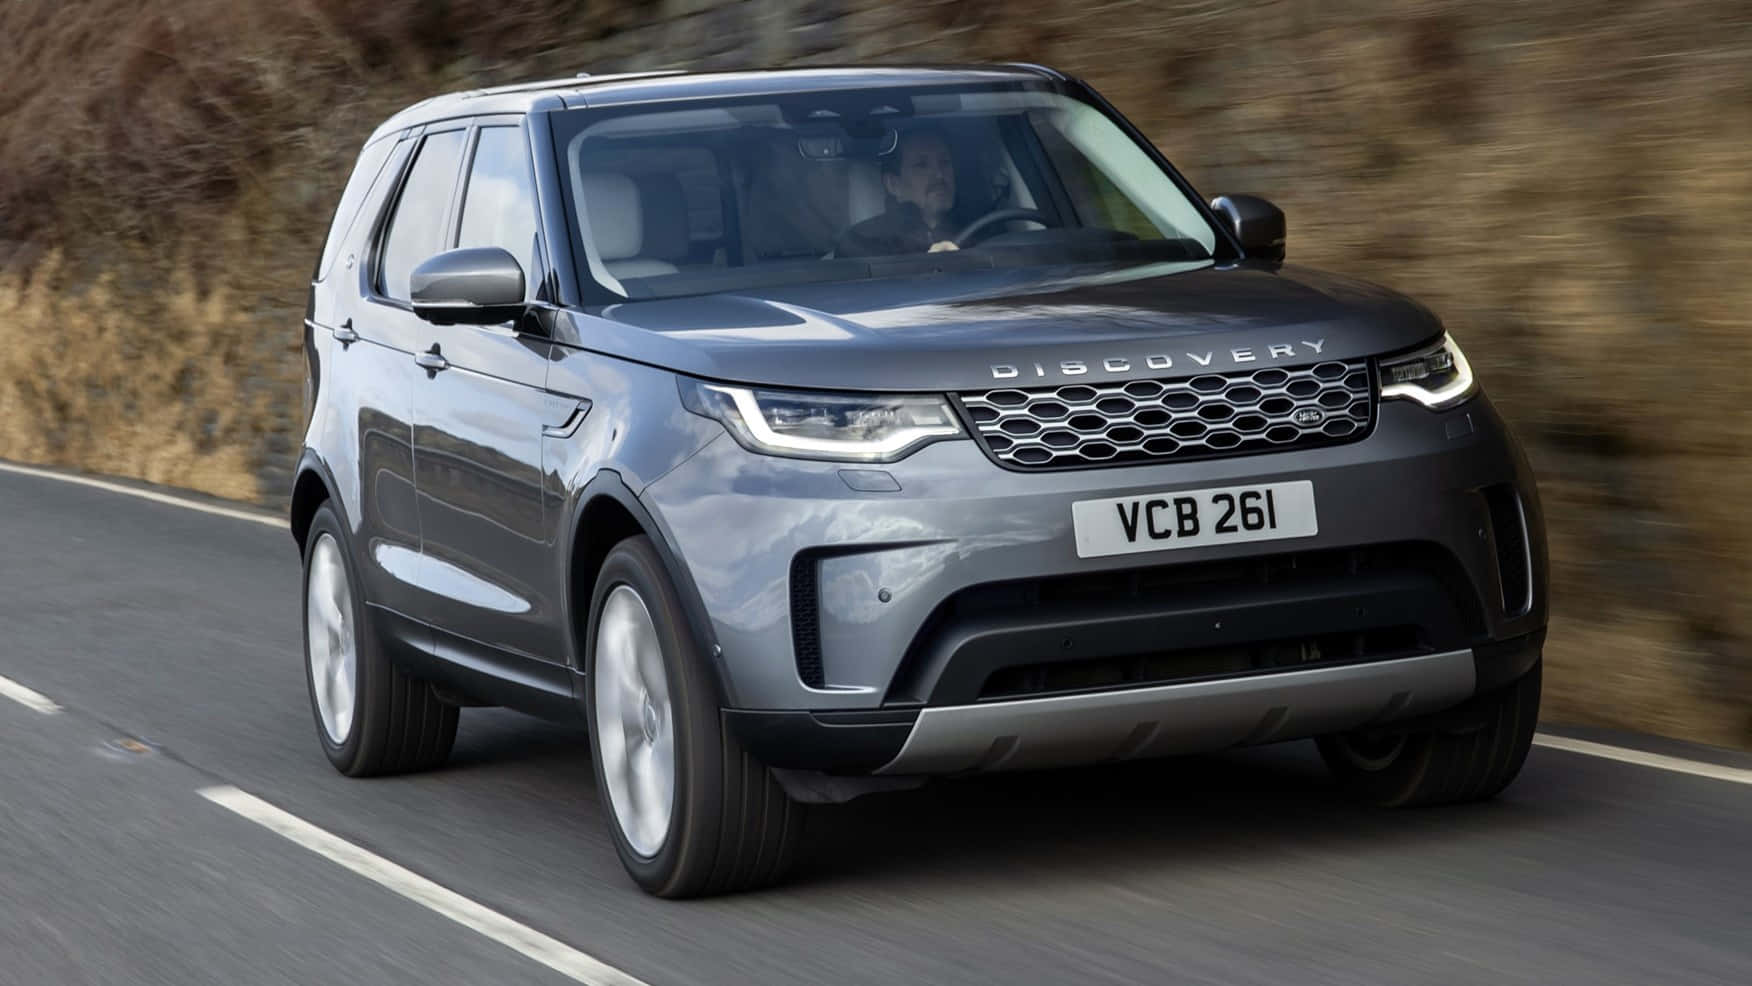 Stunning Land Rover Discovery in a Natural Setting Wallpaper